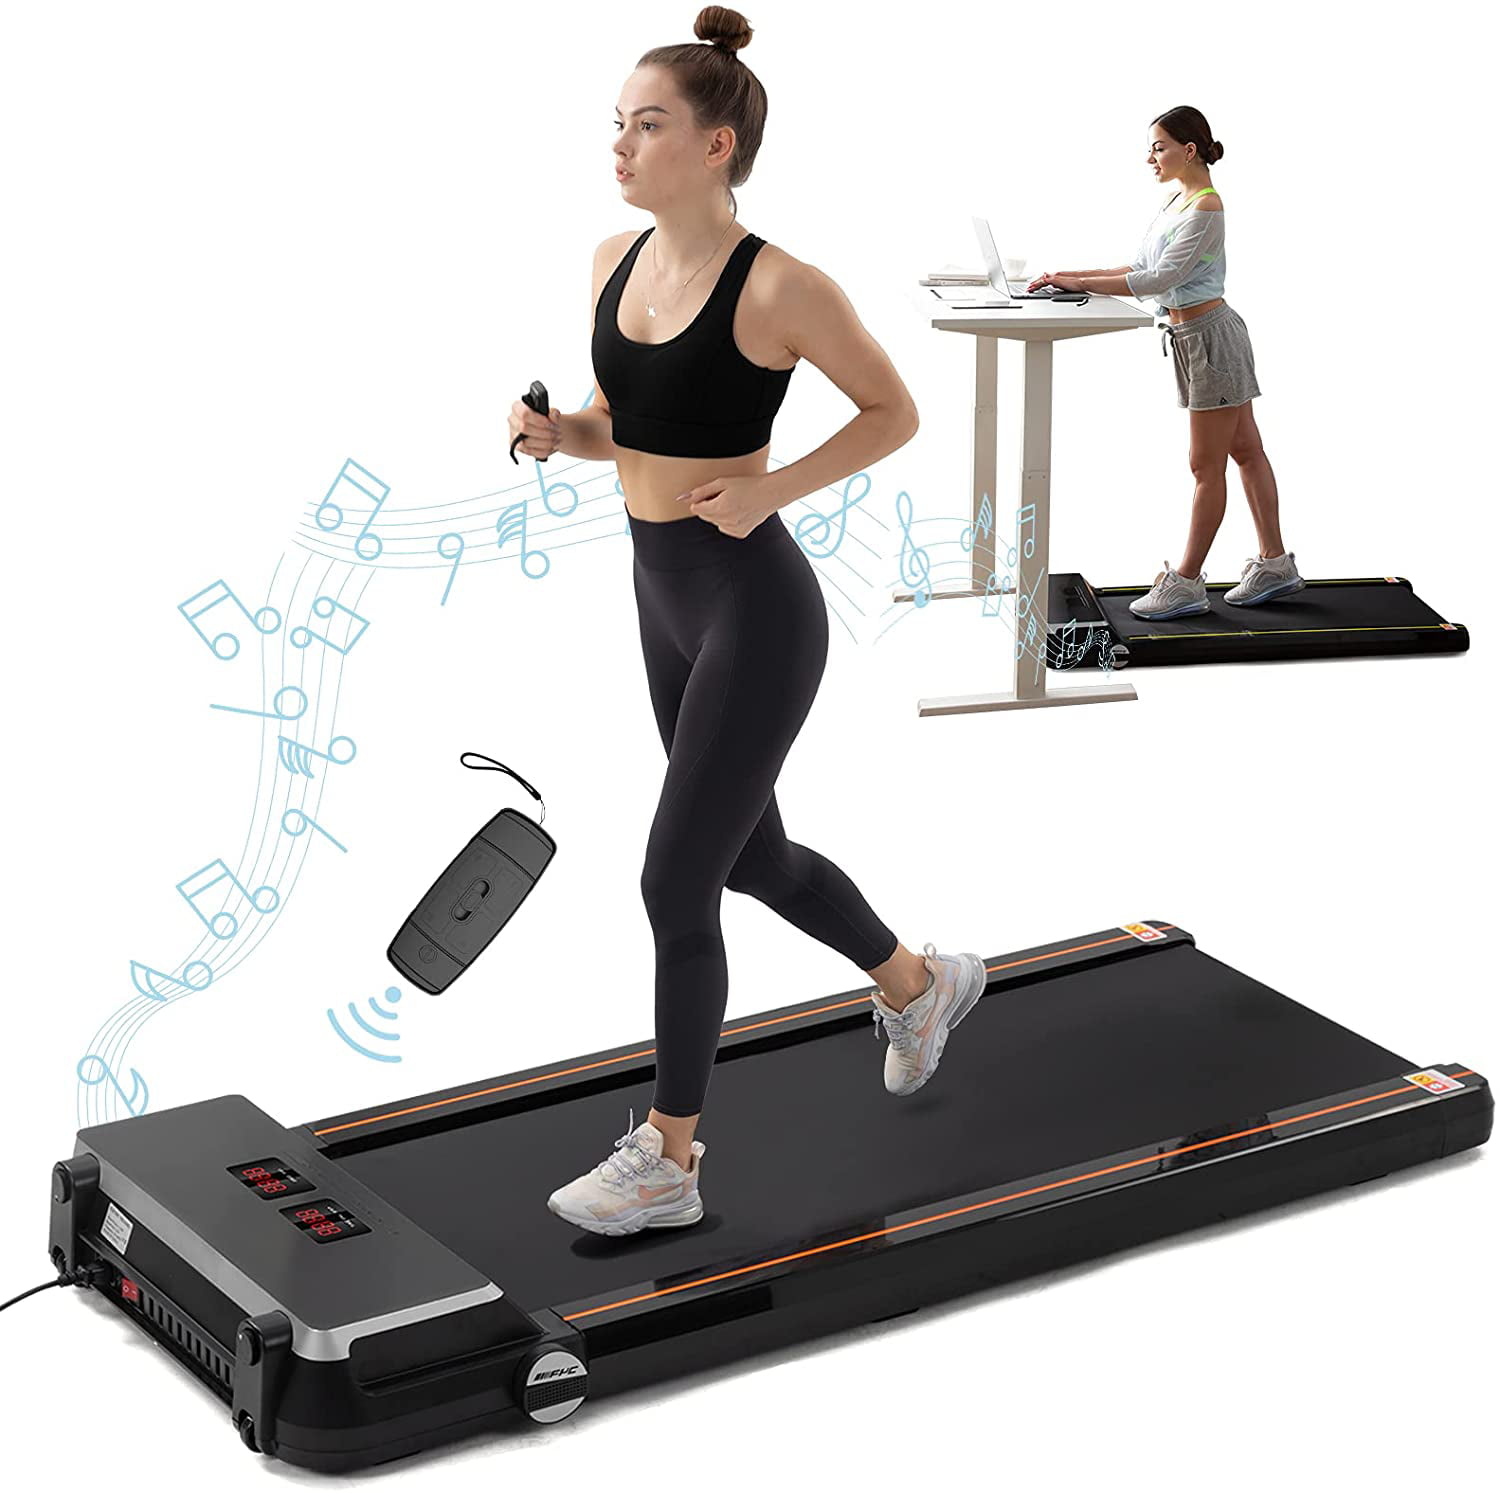 2 in 1 Treadmill for Home Portable Under Desk Treadmill with Machine Compact Remote Control LED Display for Fitness Workout Running Walking Jogging Exercise Folding Treadmill Installation Free 